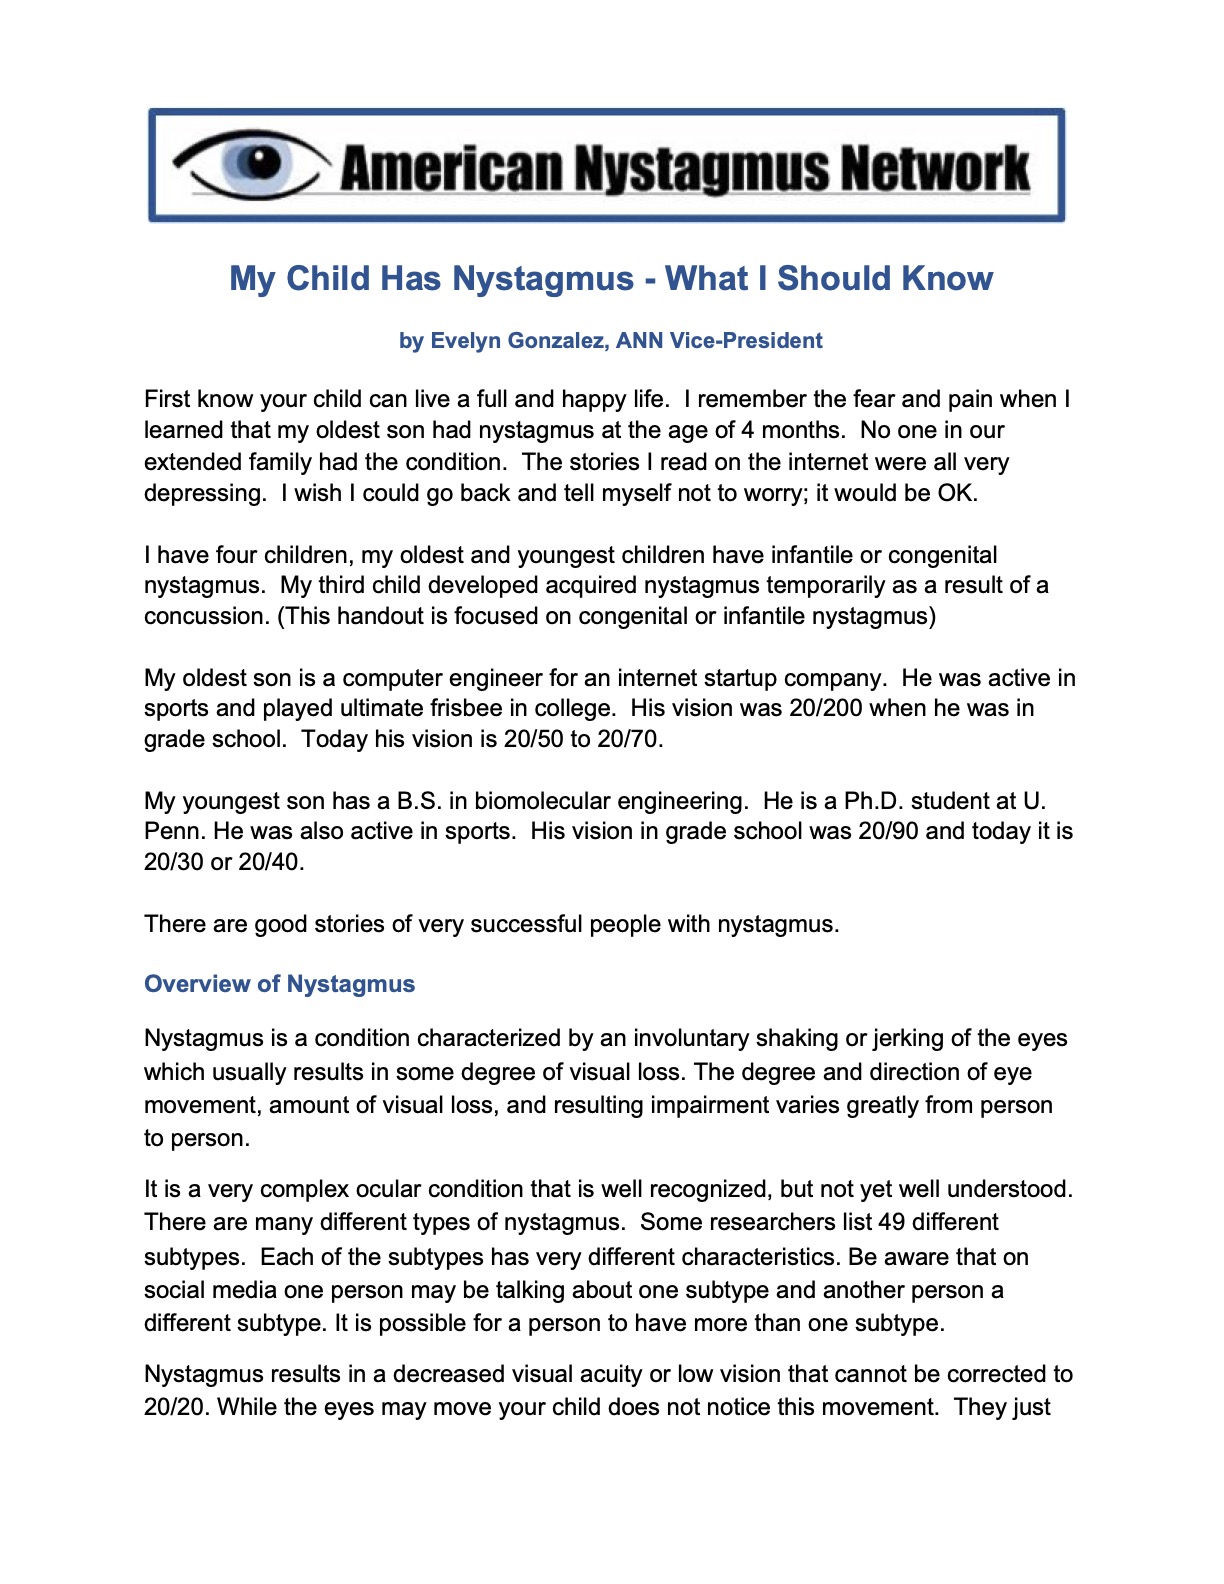 My Child has Nystagmus - What I should know